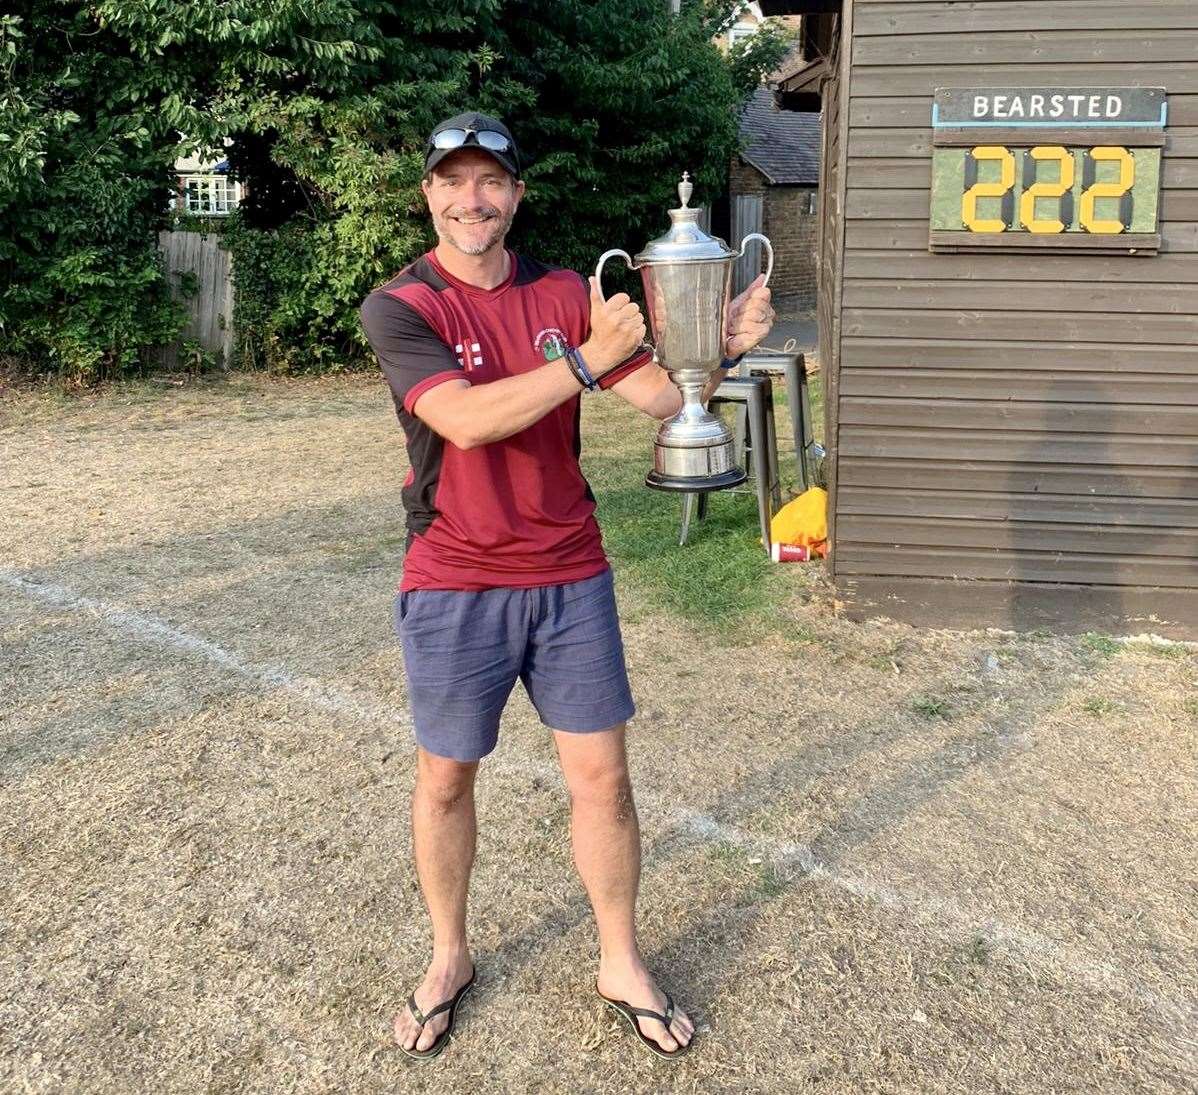 Happier days! David Patton holding the Kent Regional Cup which Bearsted won as part of the overall National Village Cup competition in 2020